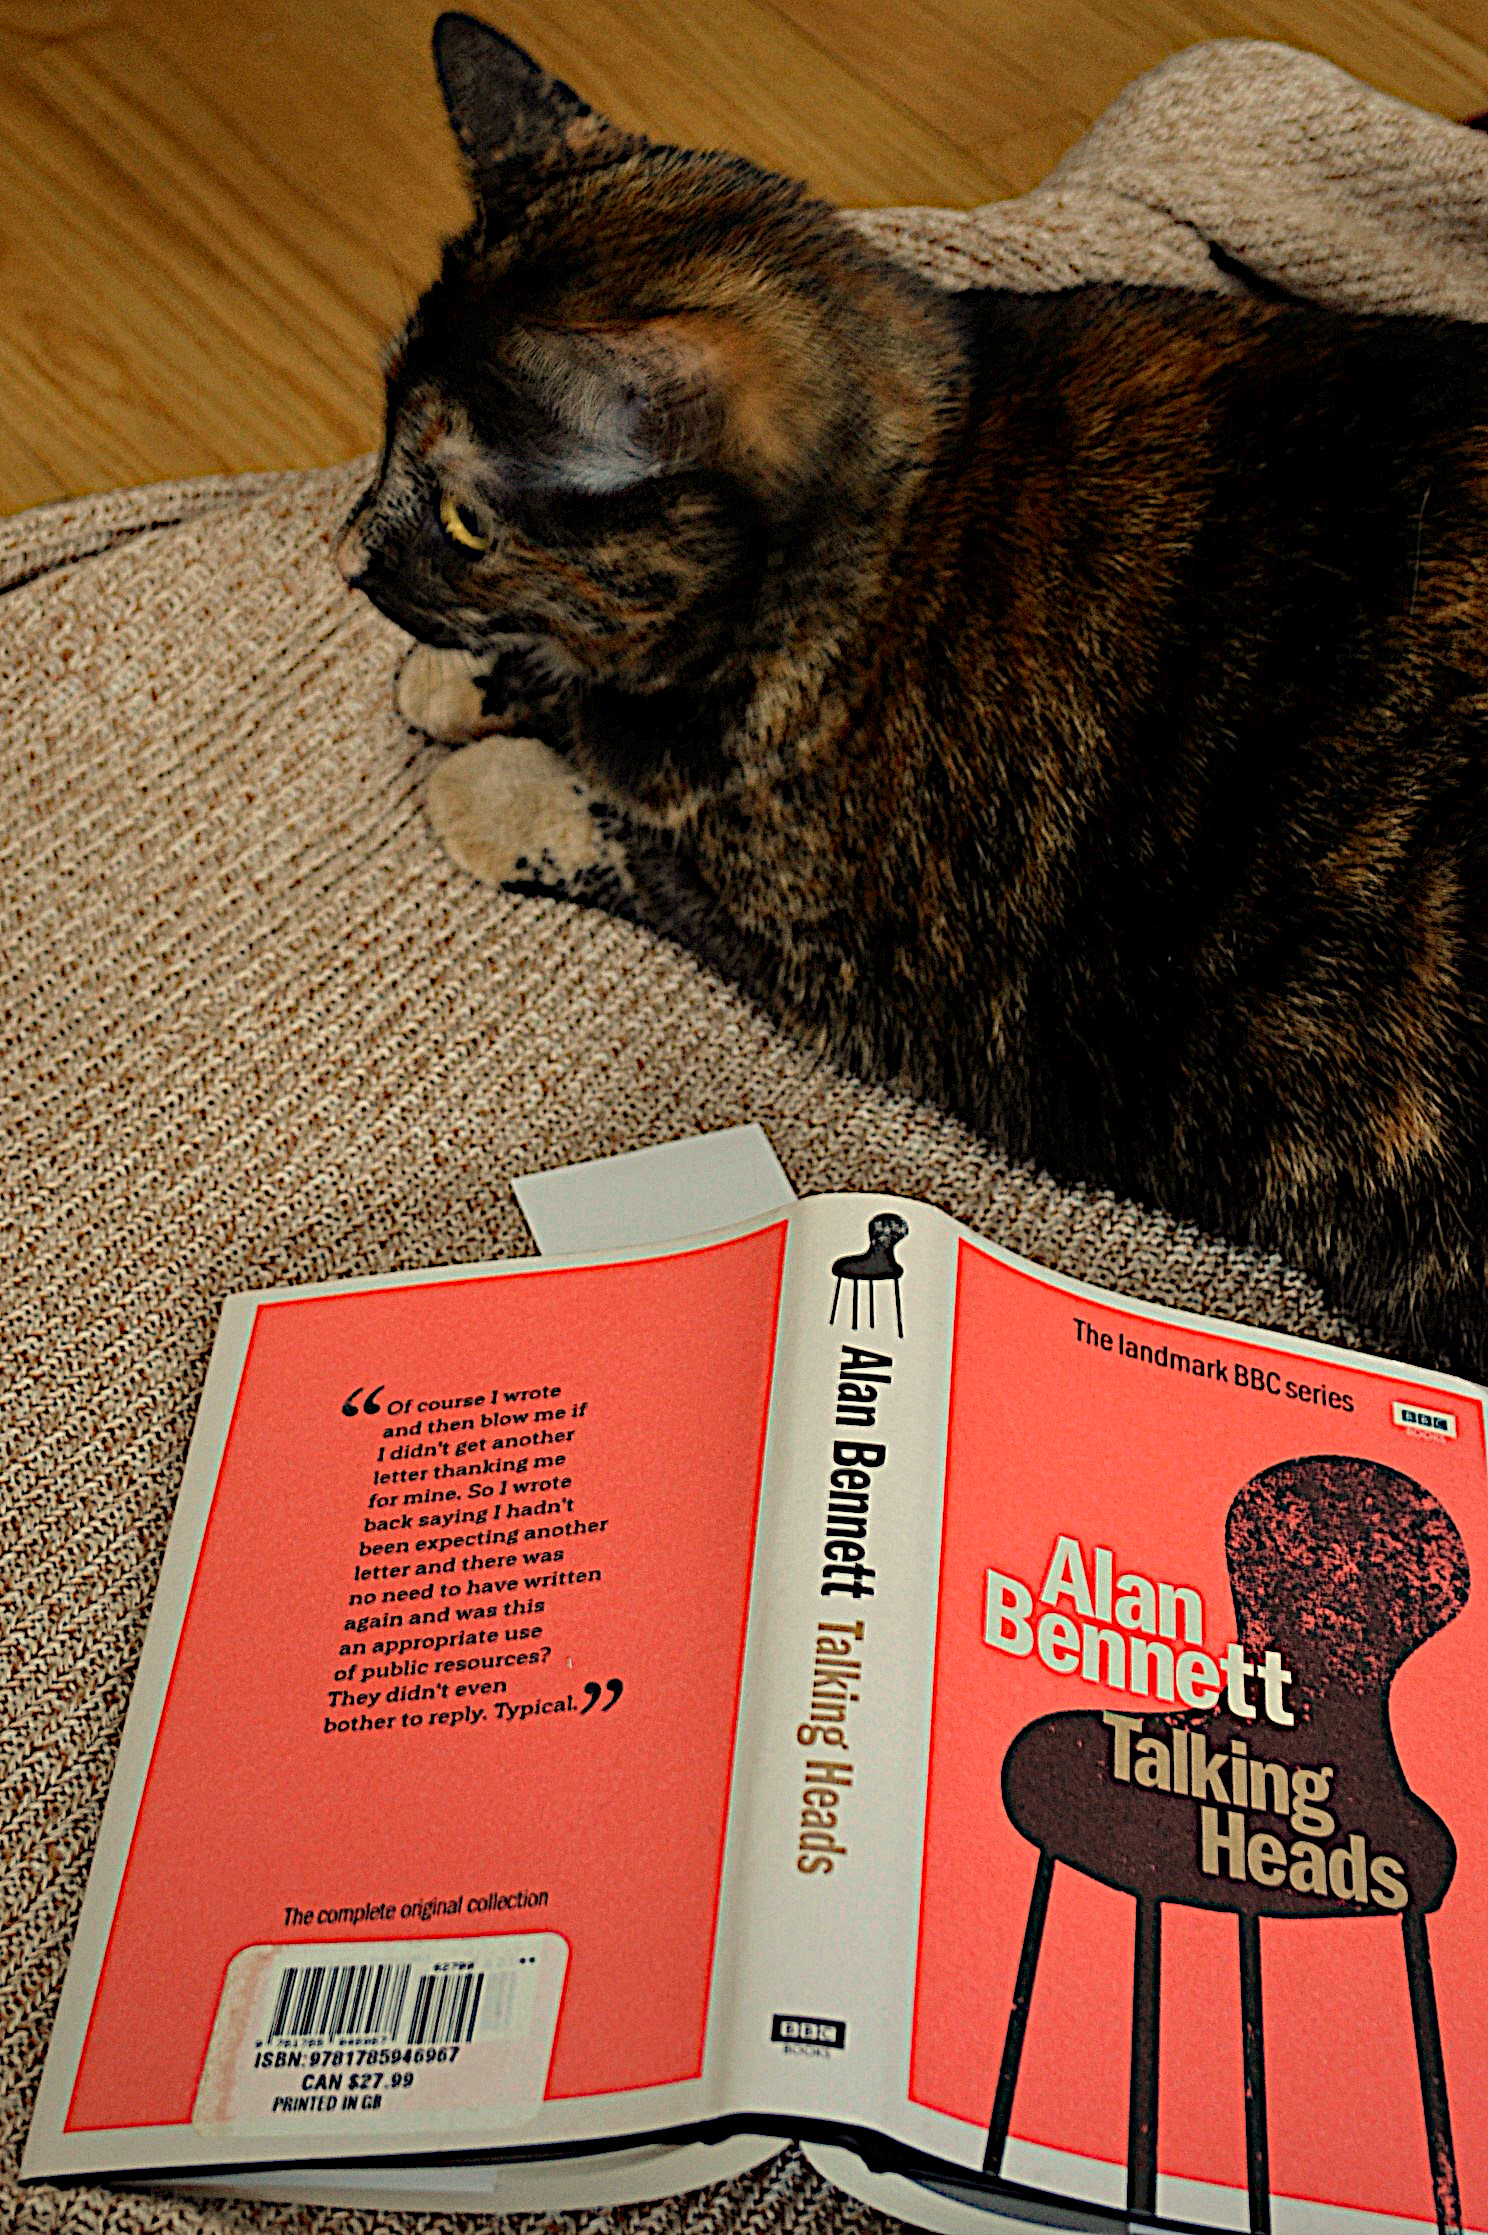 A tortoiseshell cat crouches beside the bright orange cover of Talking Heads.